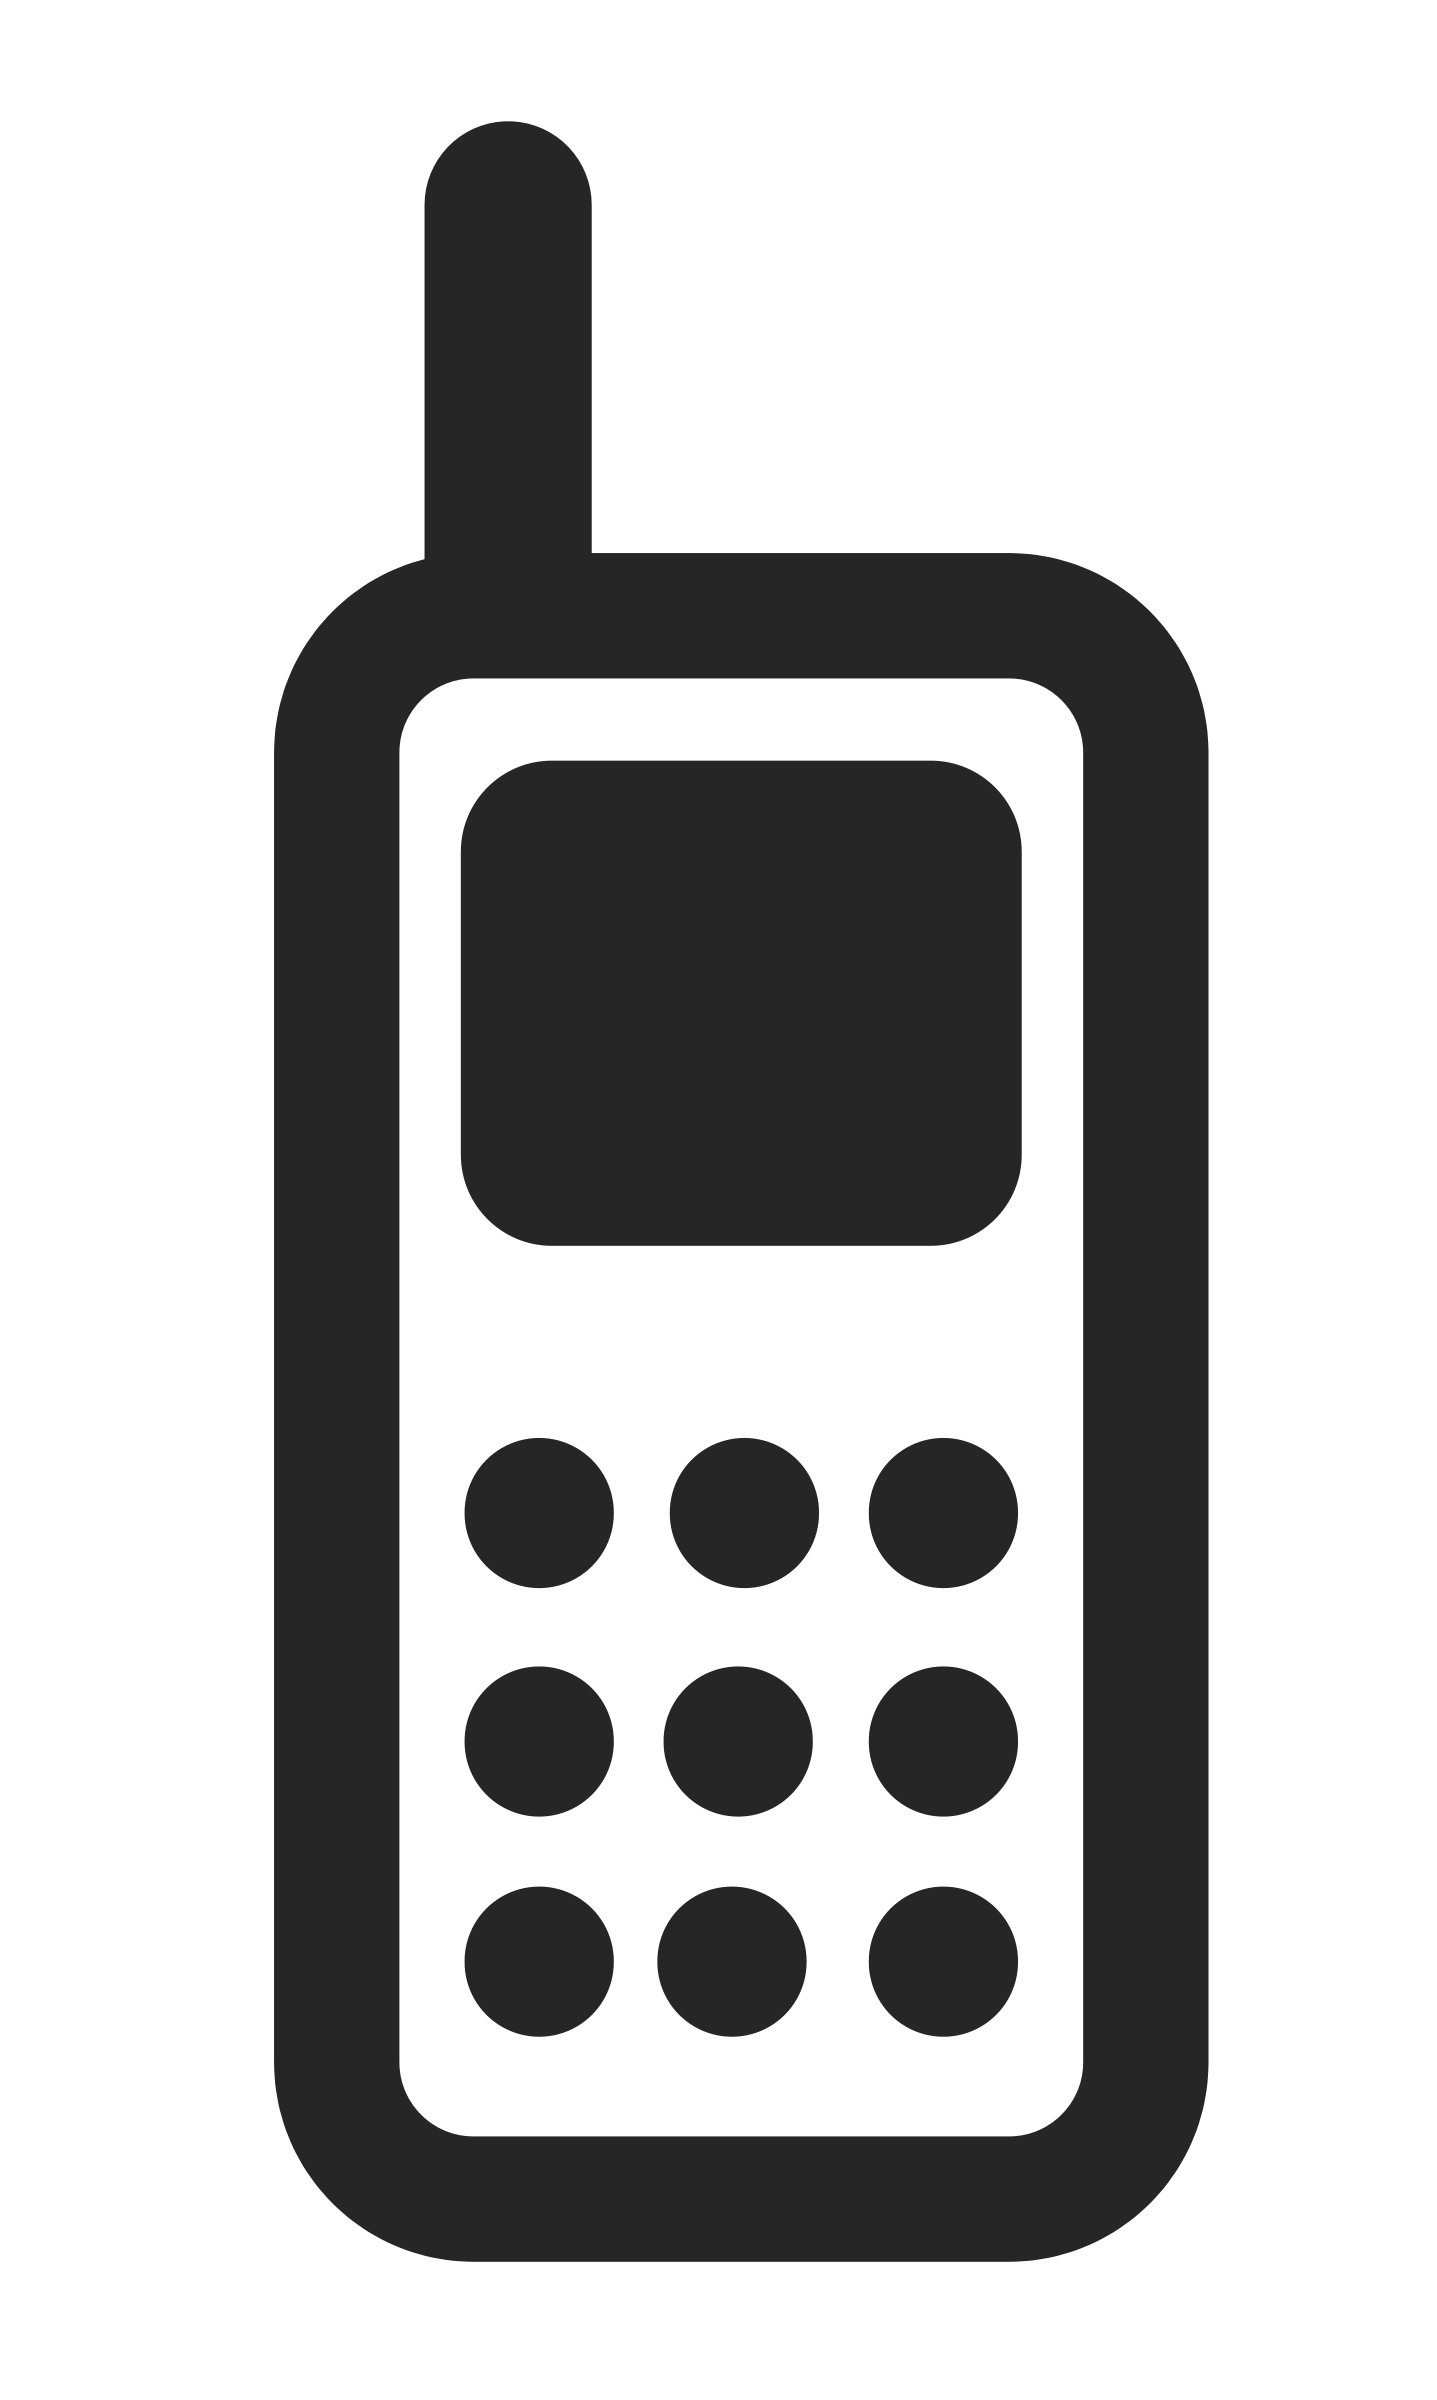 phone icon black and white